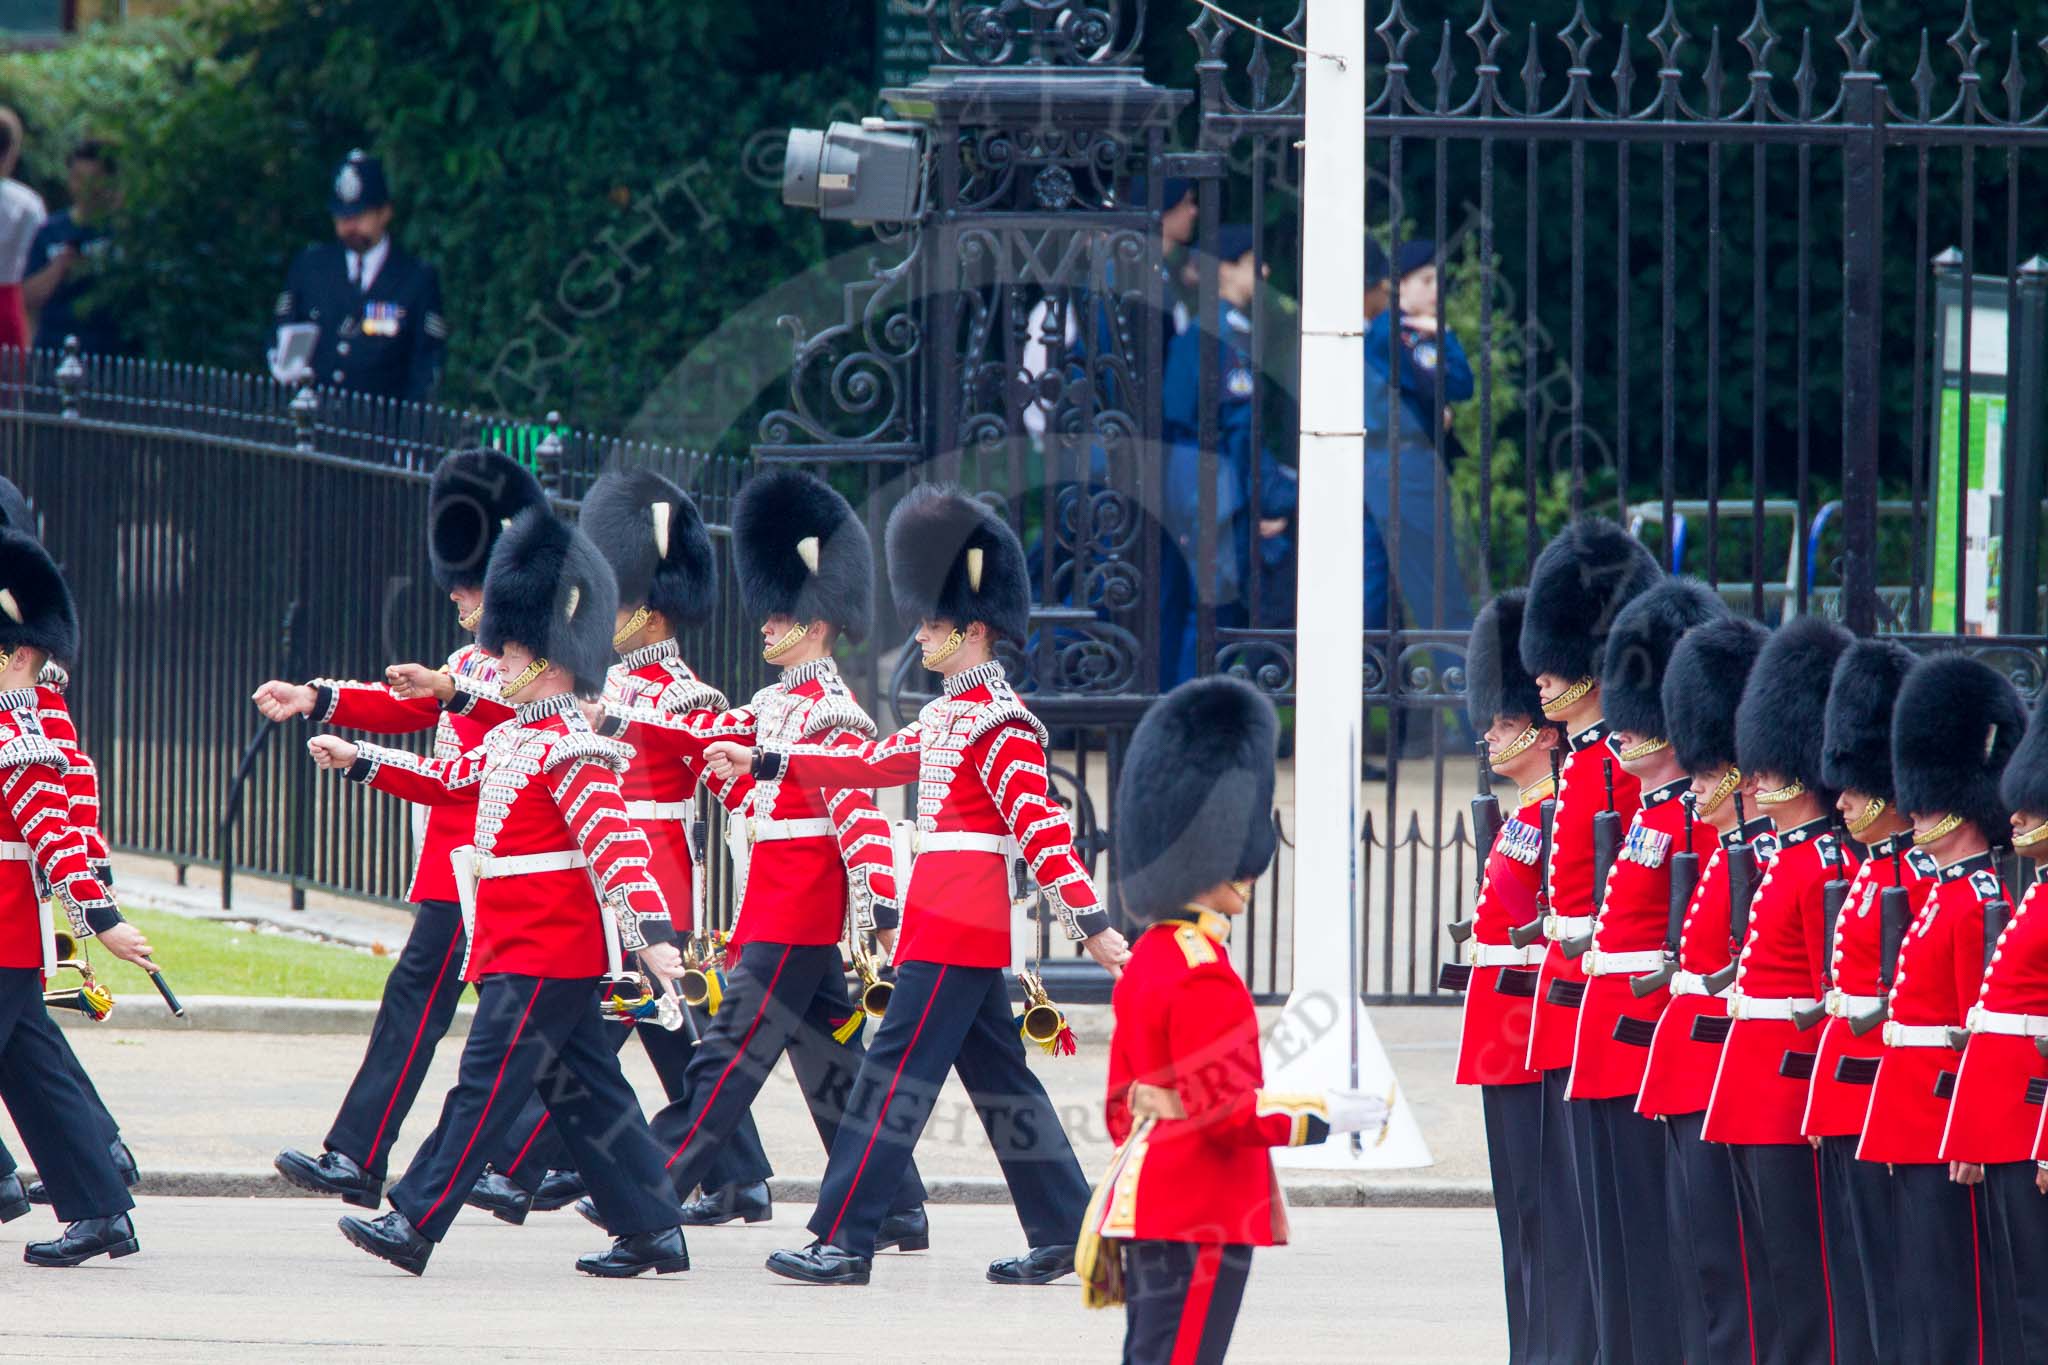 Trooping the Colour 2014.
Horse Guards Parade, Westminster,
London SW1A,

United Kingdom,
on 14 June 2014 at 10:29, image #174